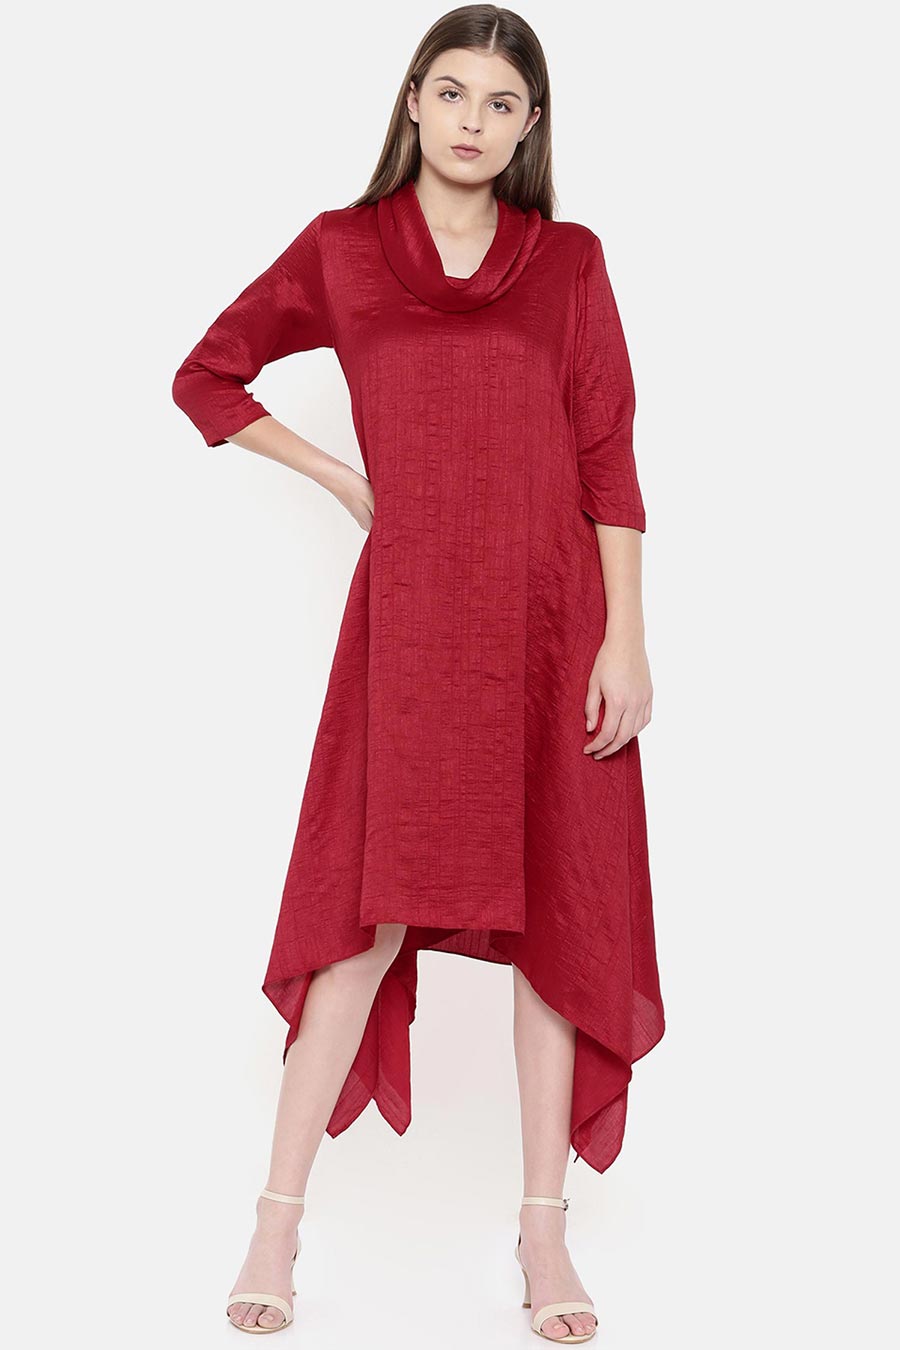 Red Cowl Neck Dress